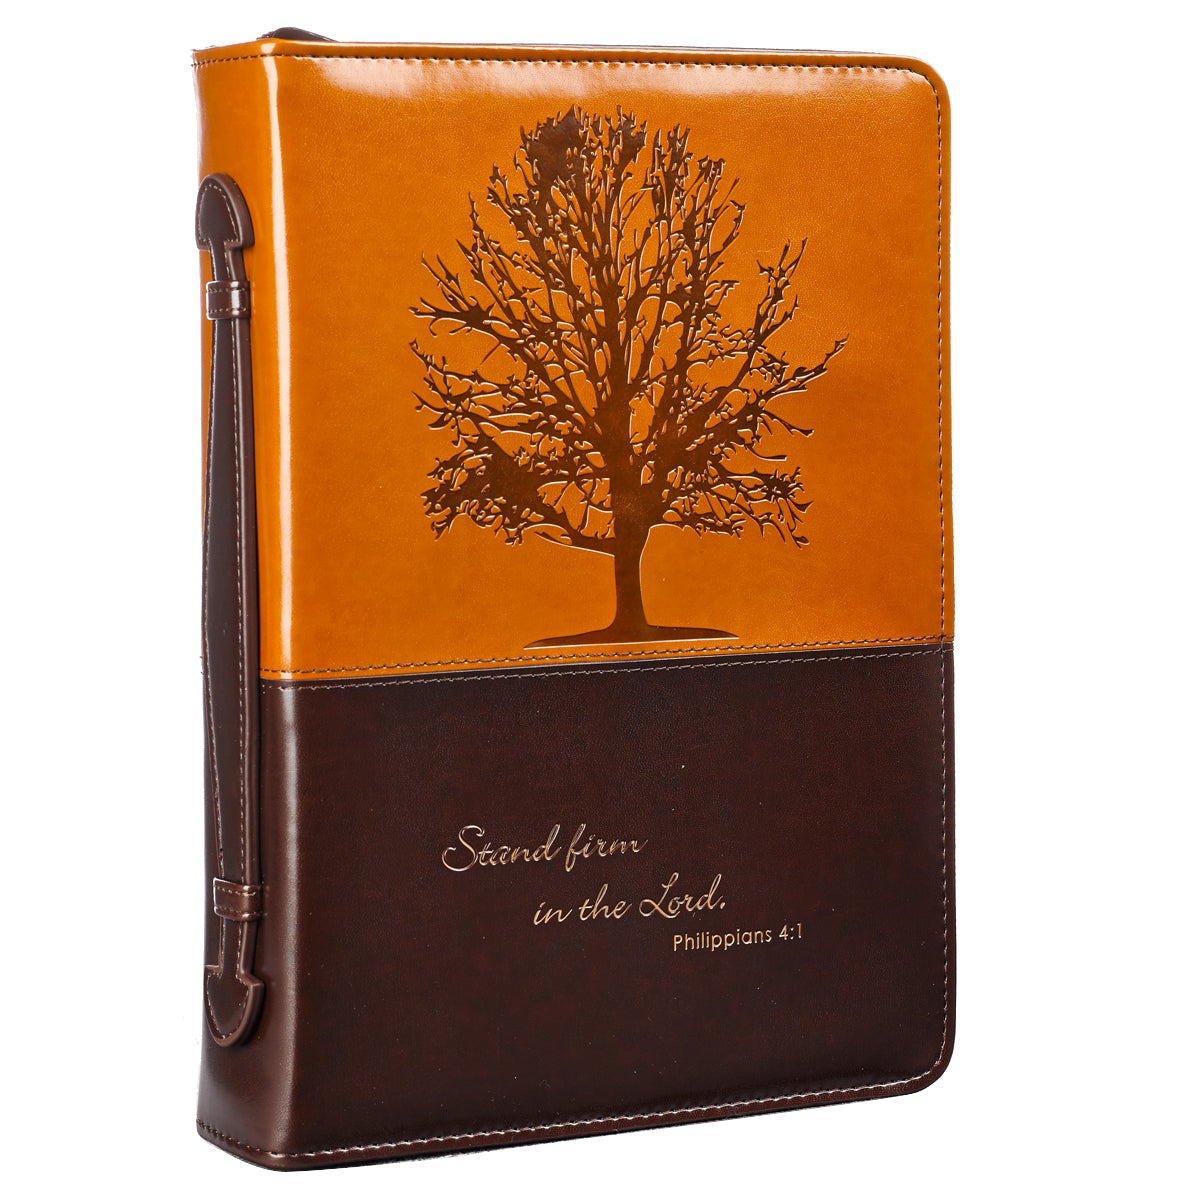 Image of "Stand firm in the Lord" (Brown) Two-tone LuxLeather Bible Cover, Large other